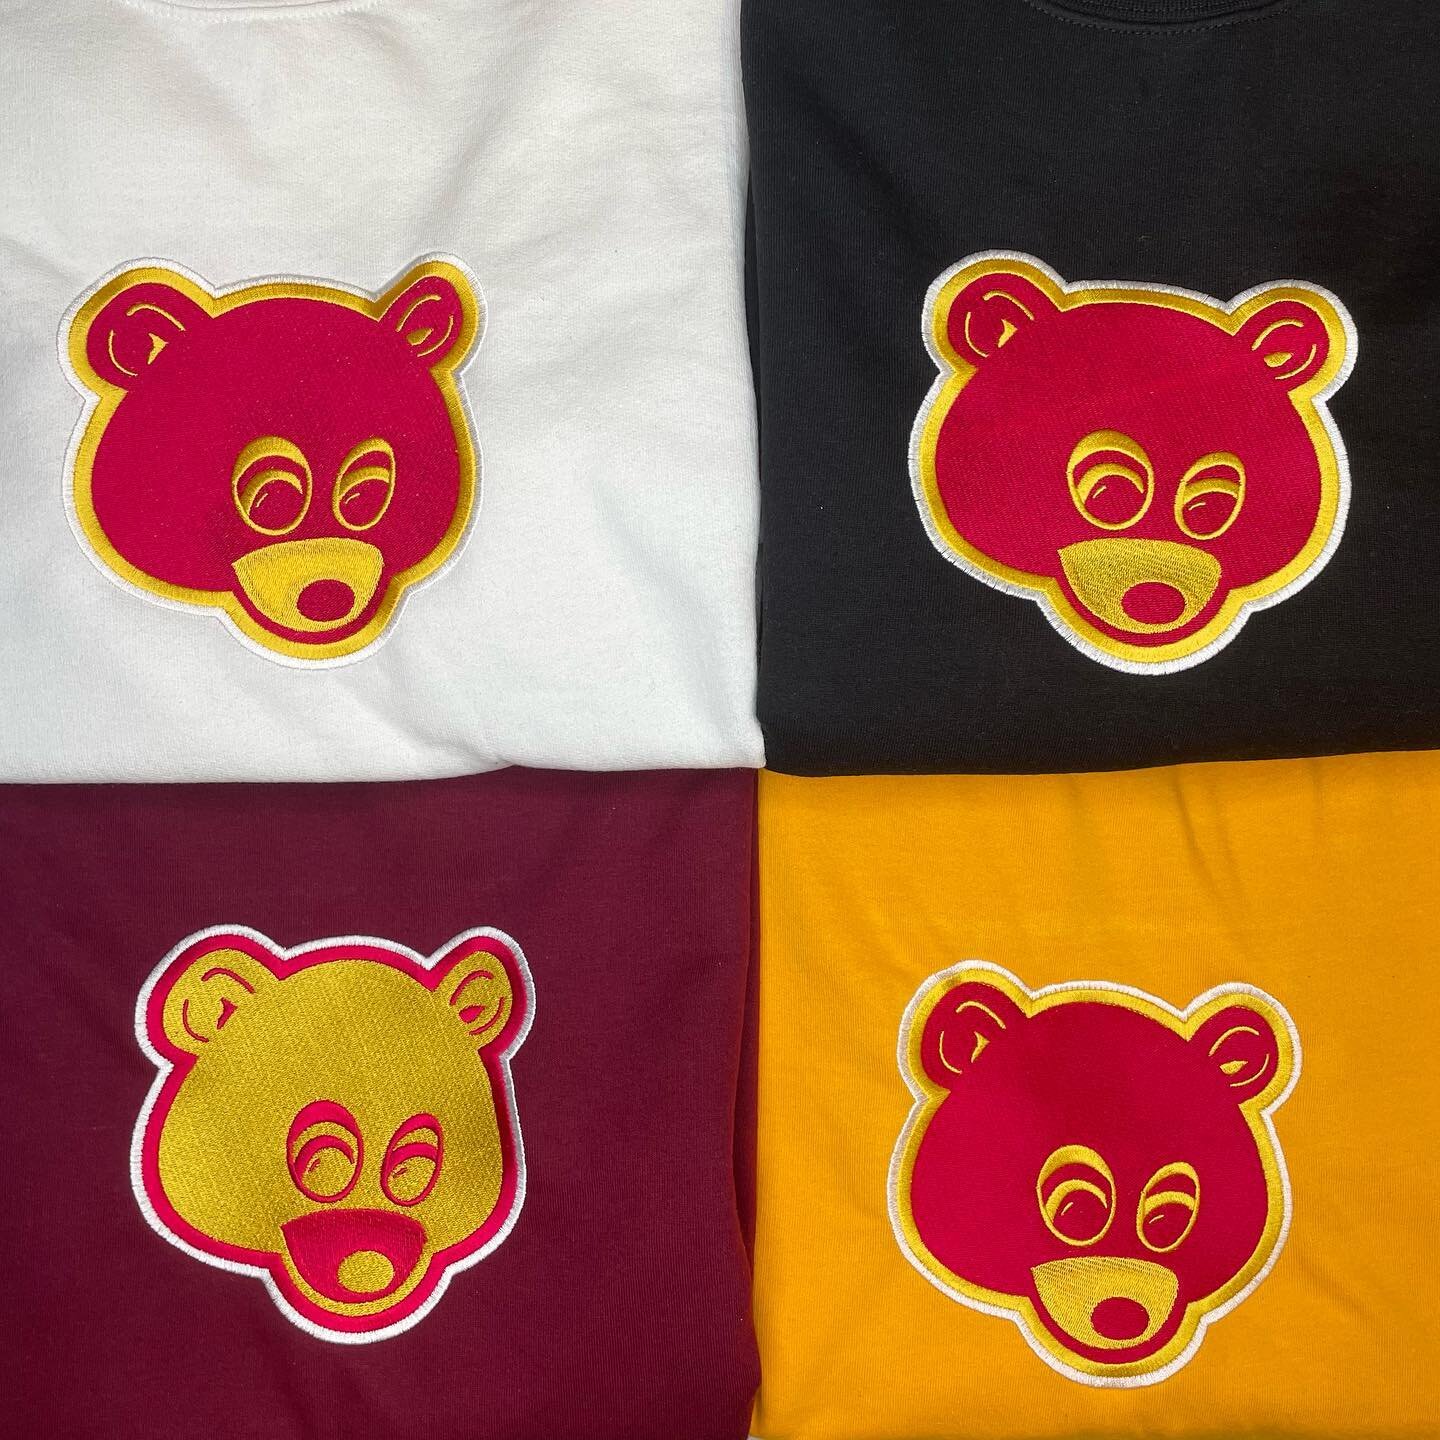 College Dropout Bears embroidery